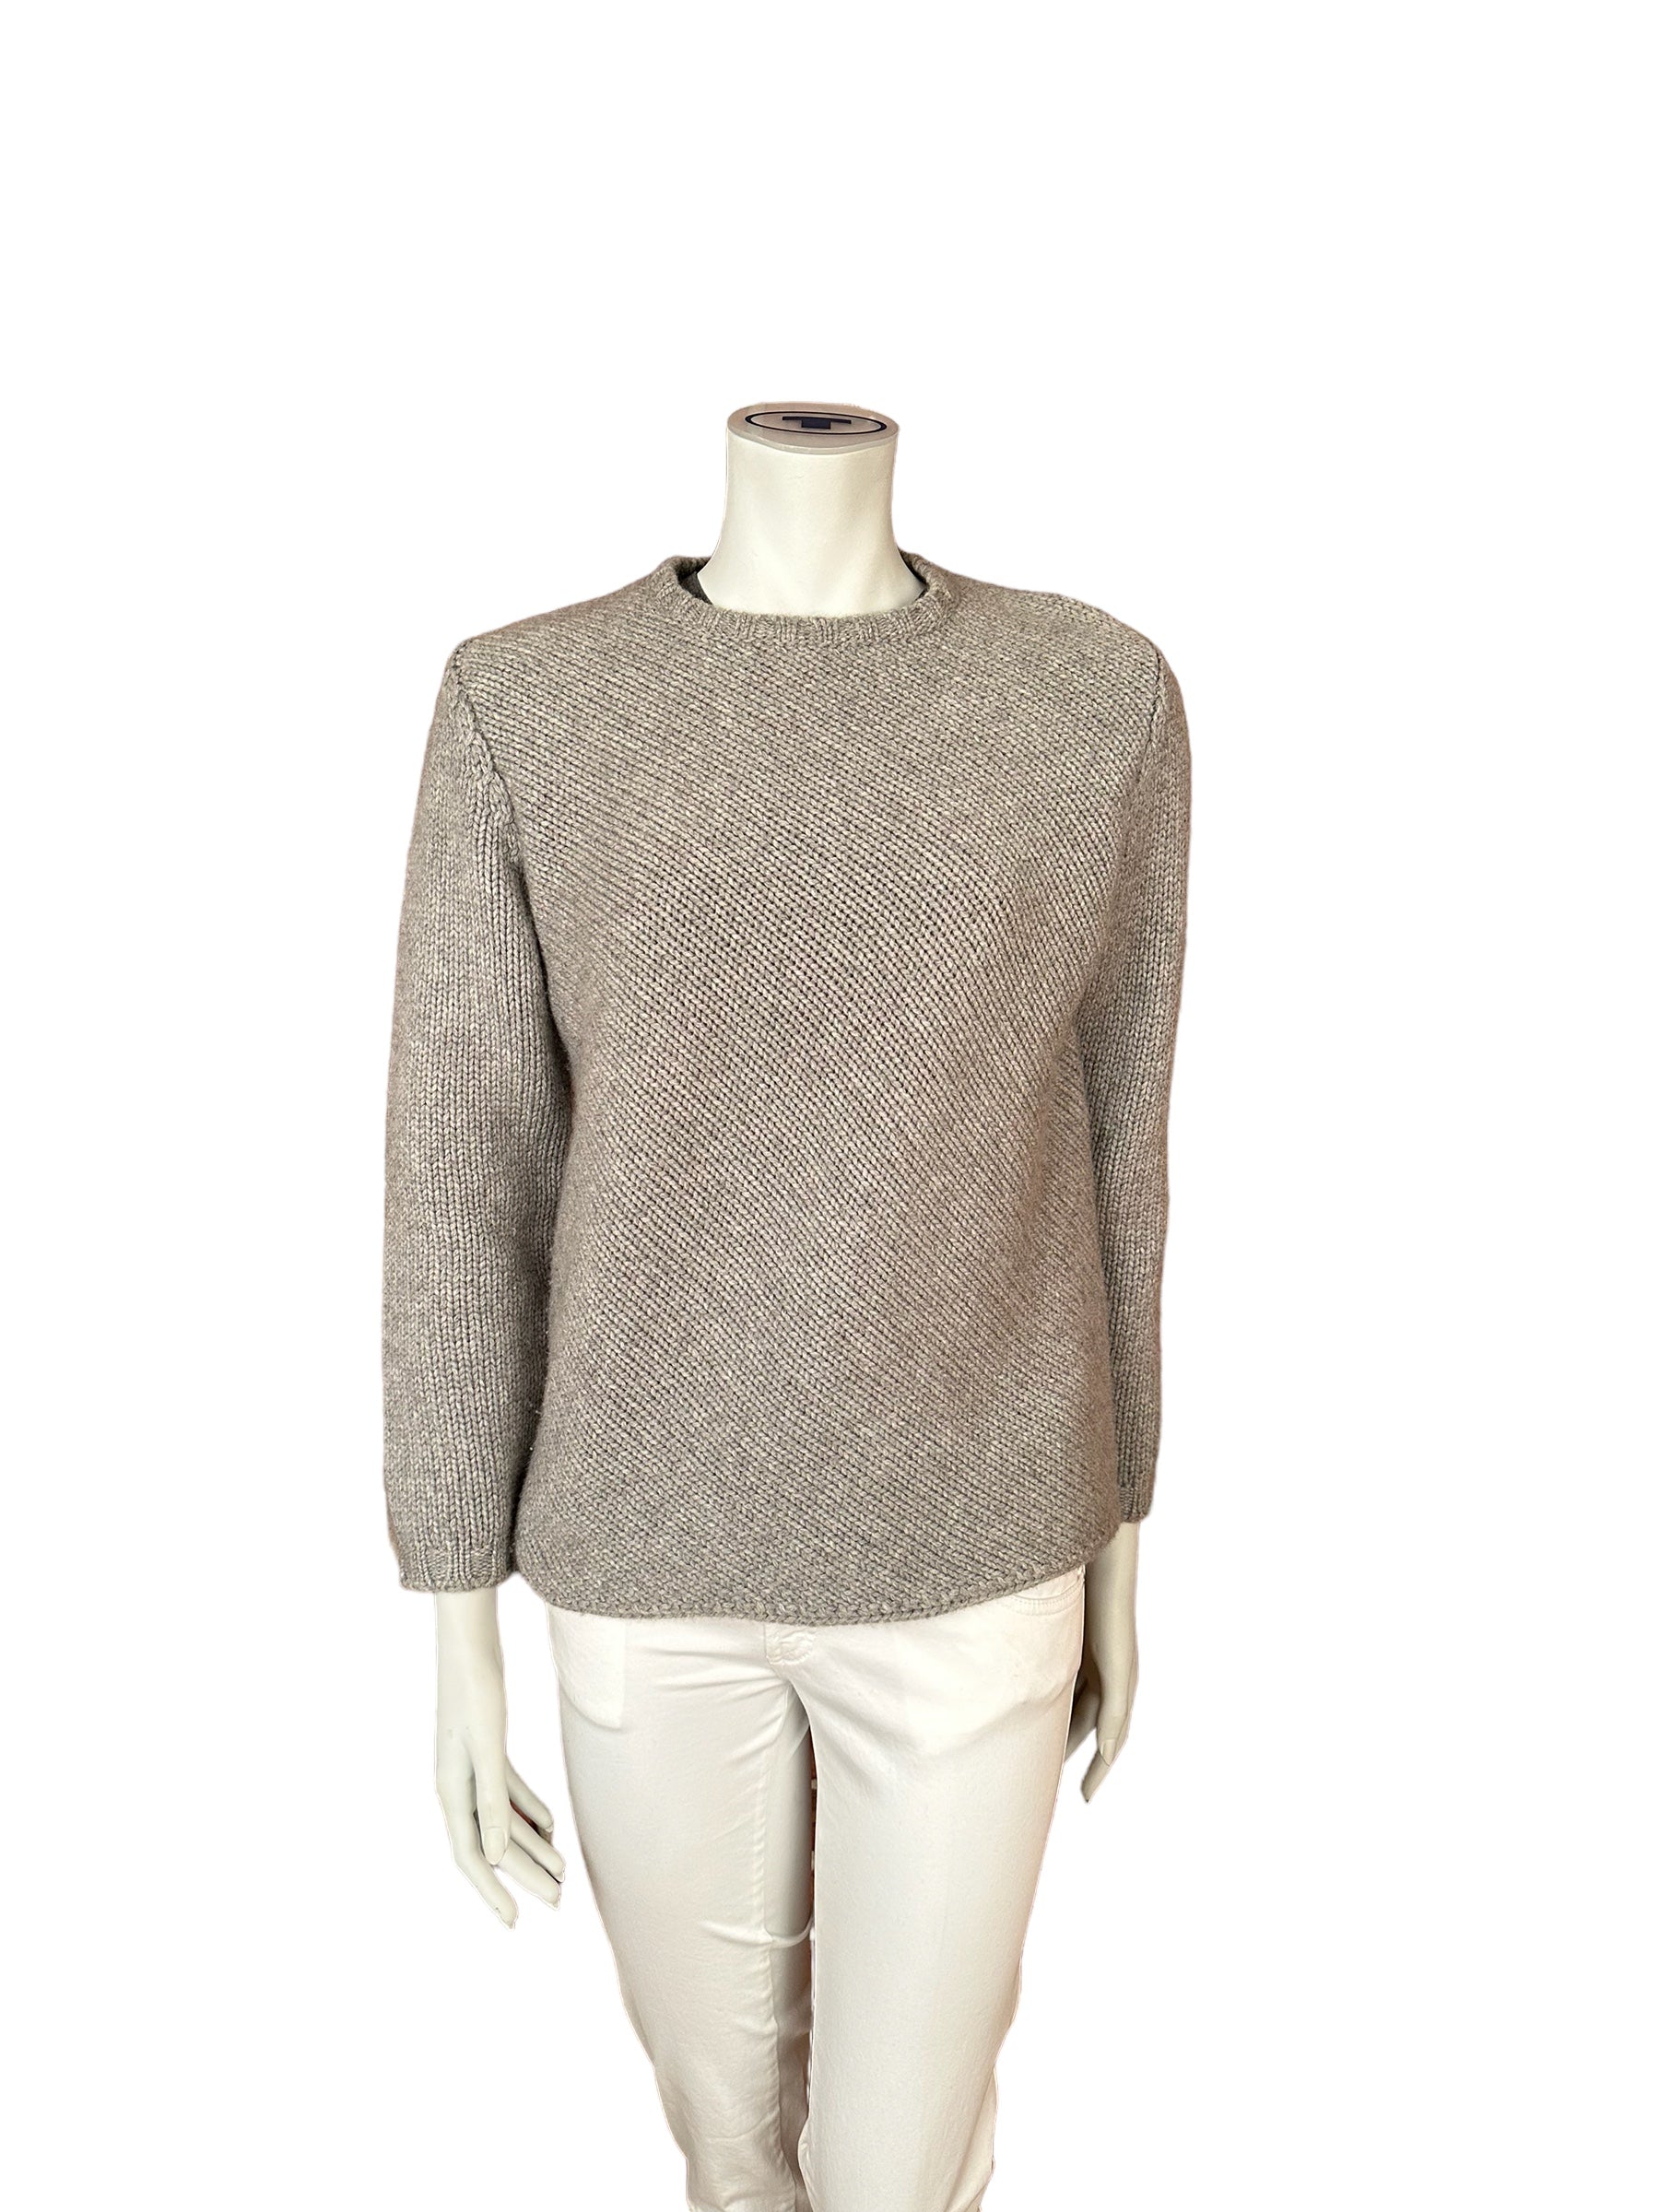 Brunello Cuclnelli knitted cashmere sweater